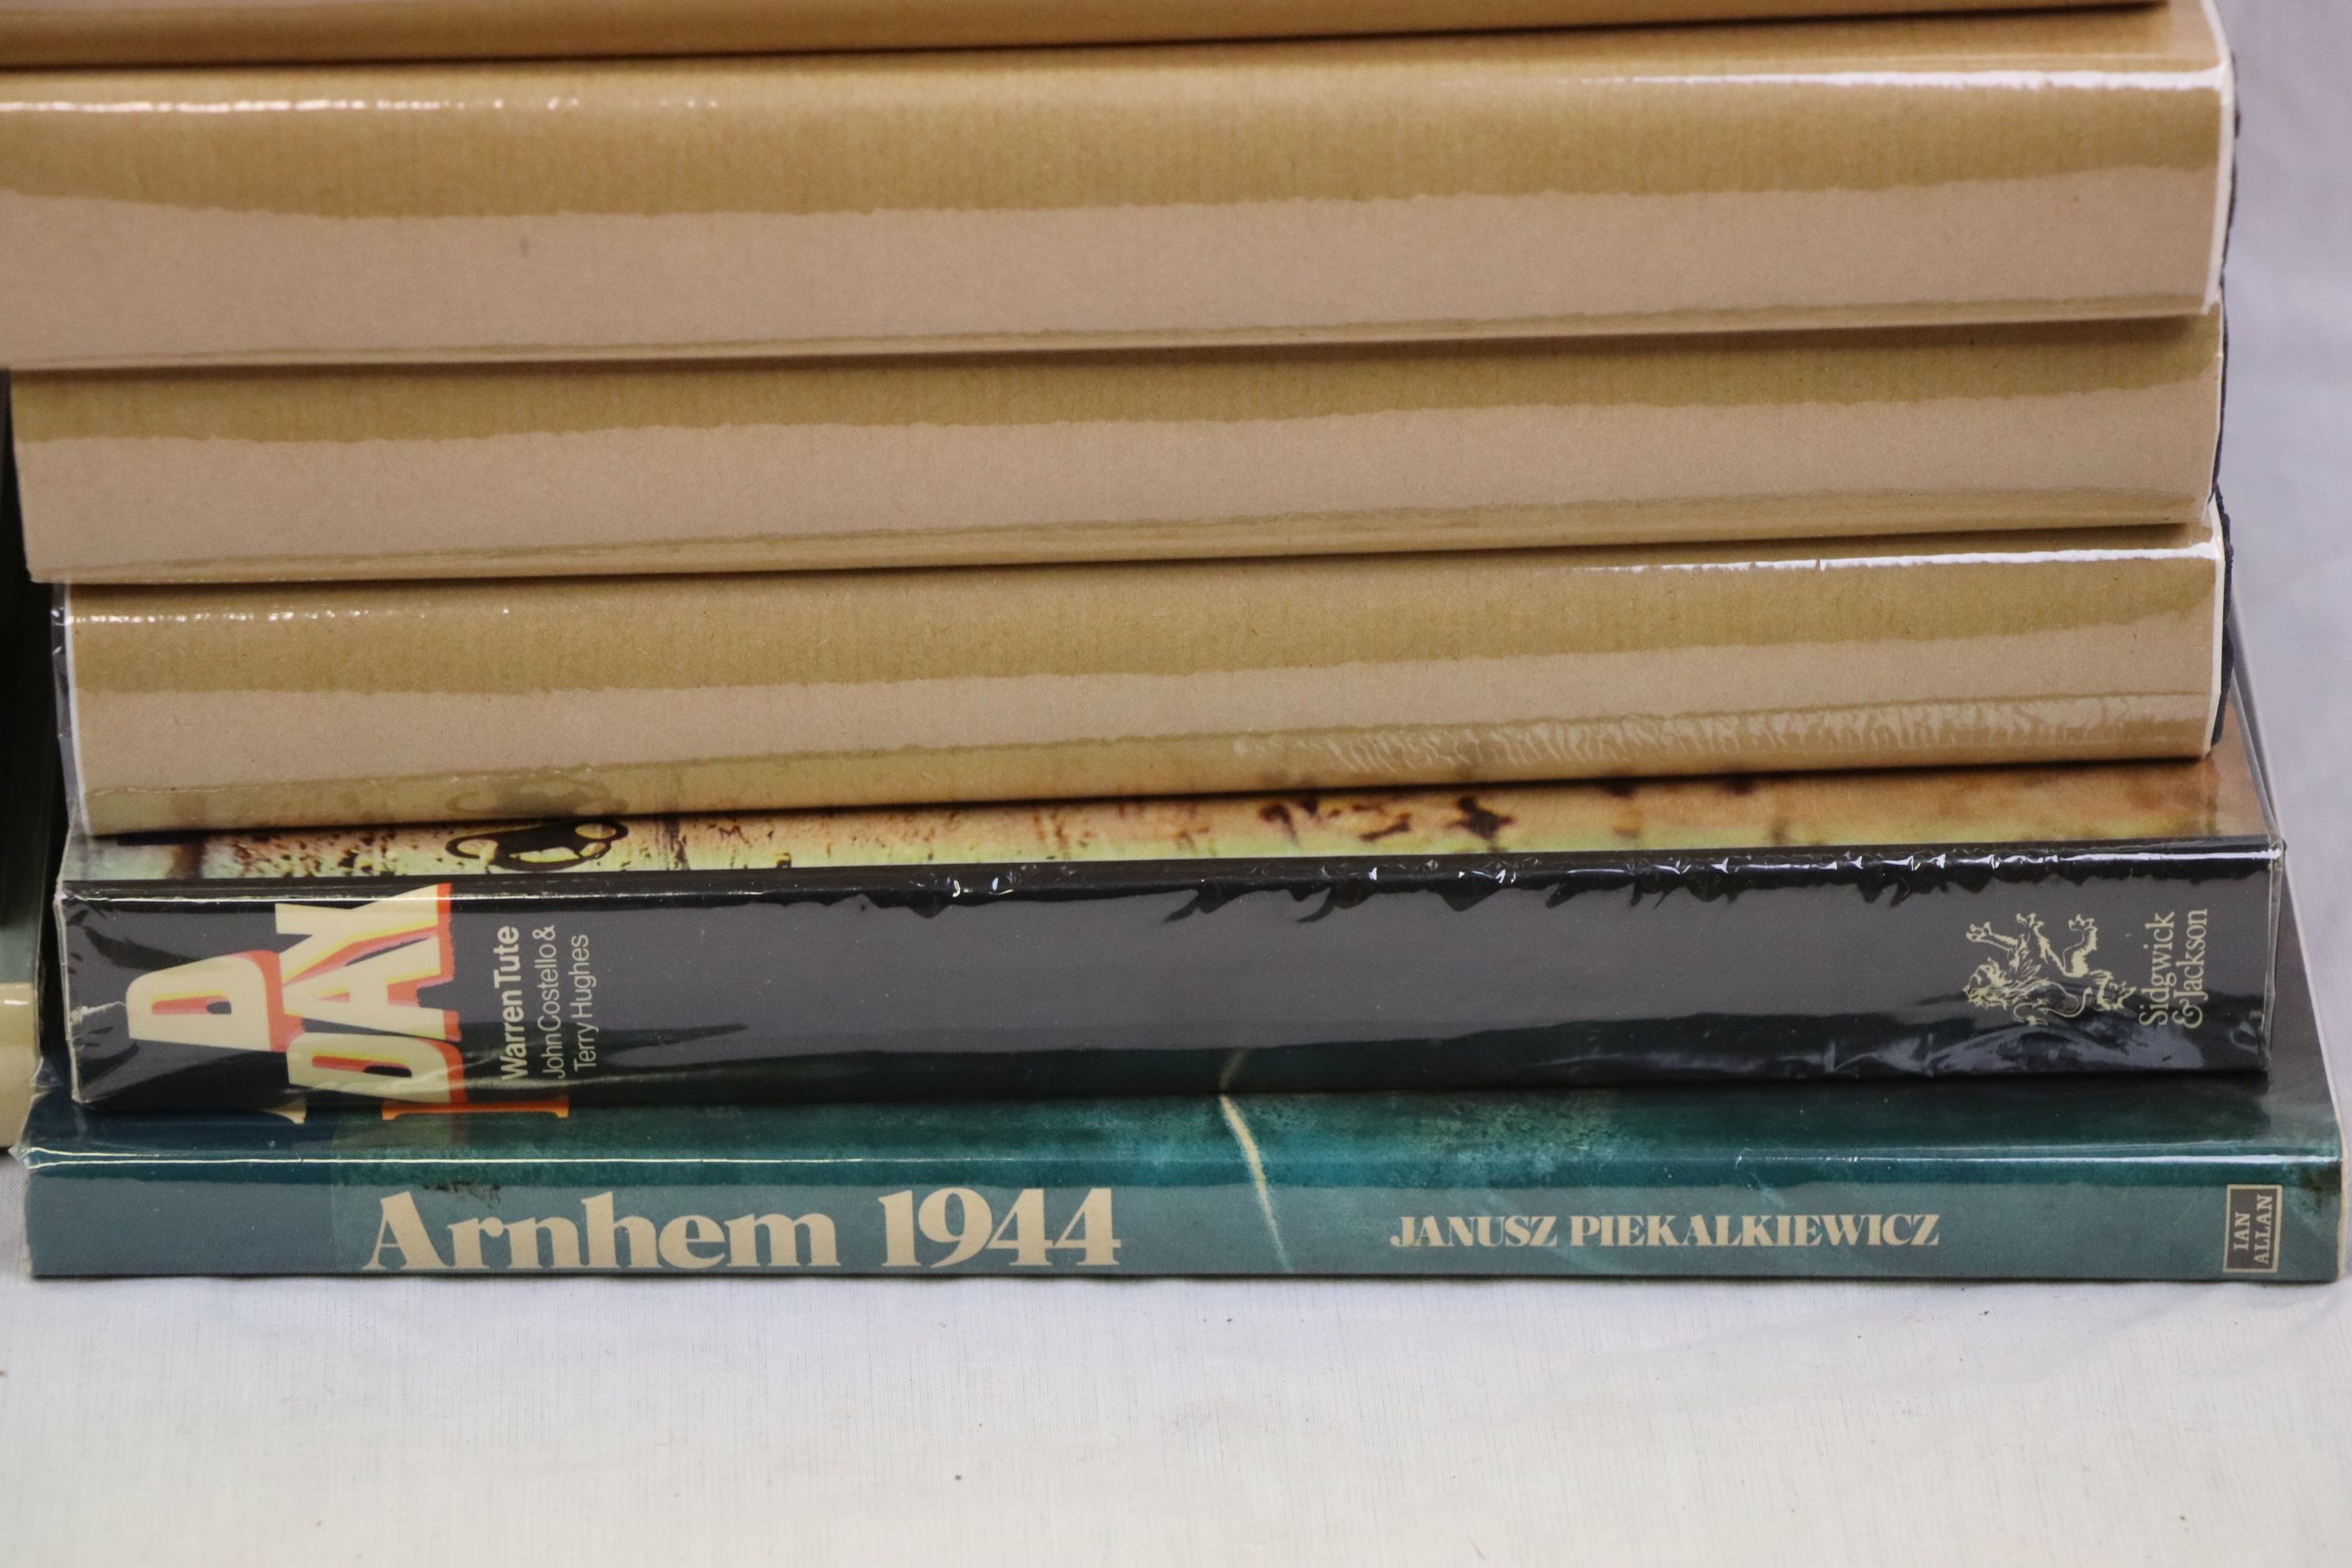 A Collection Of 38 Military Books, Mainly Hardback To Include : D-Day By Warren Tute, Arnhem 1944 By - Image 9 of 10